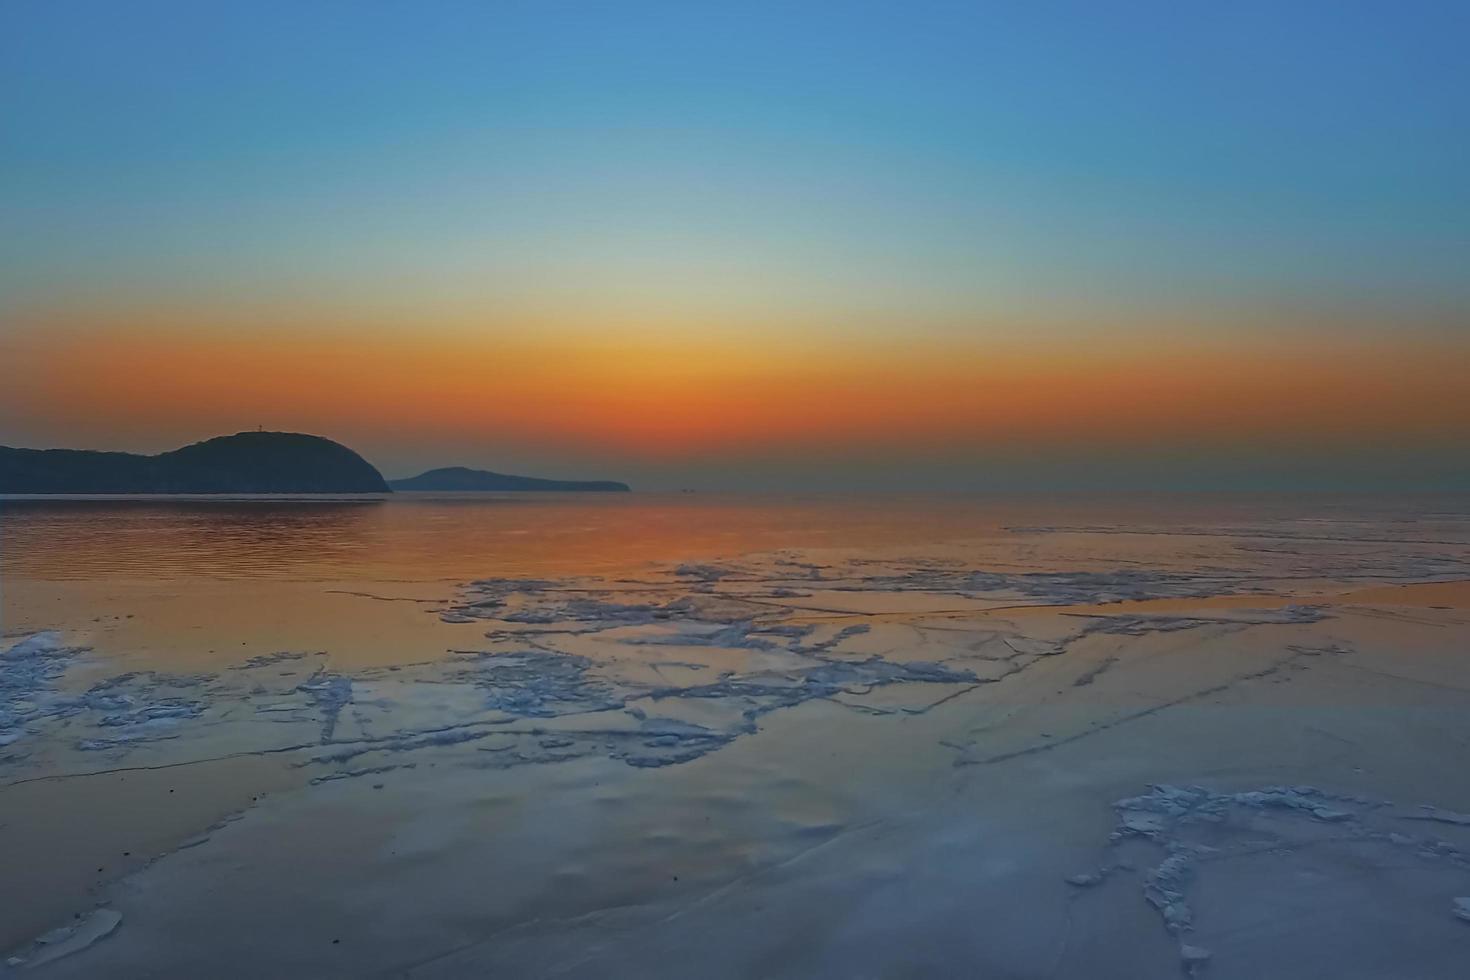 Seascape with colorful orange sunset and mountains with ice floes in the sea in Vladivostok, Russia photo